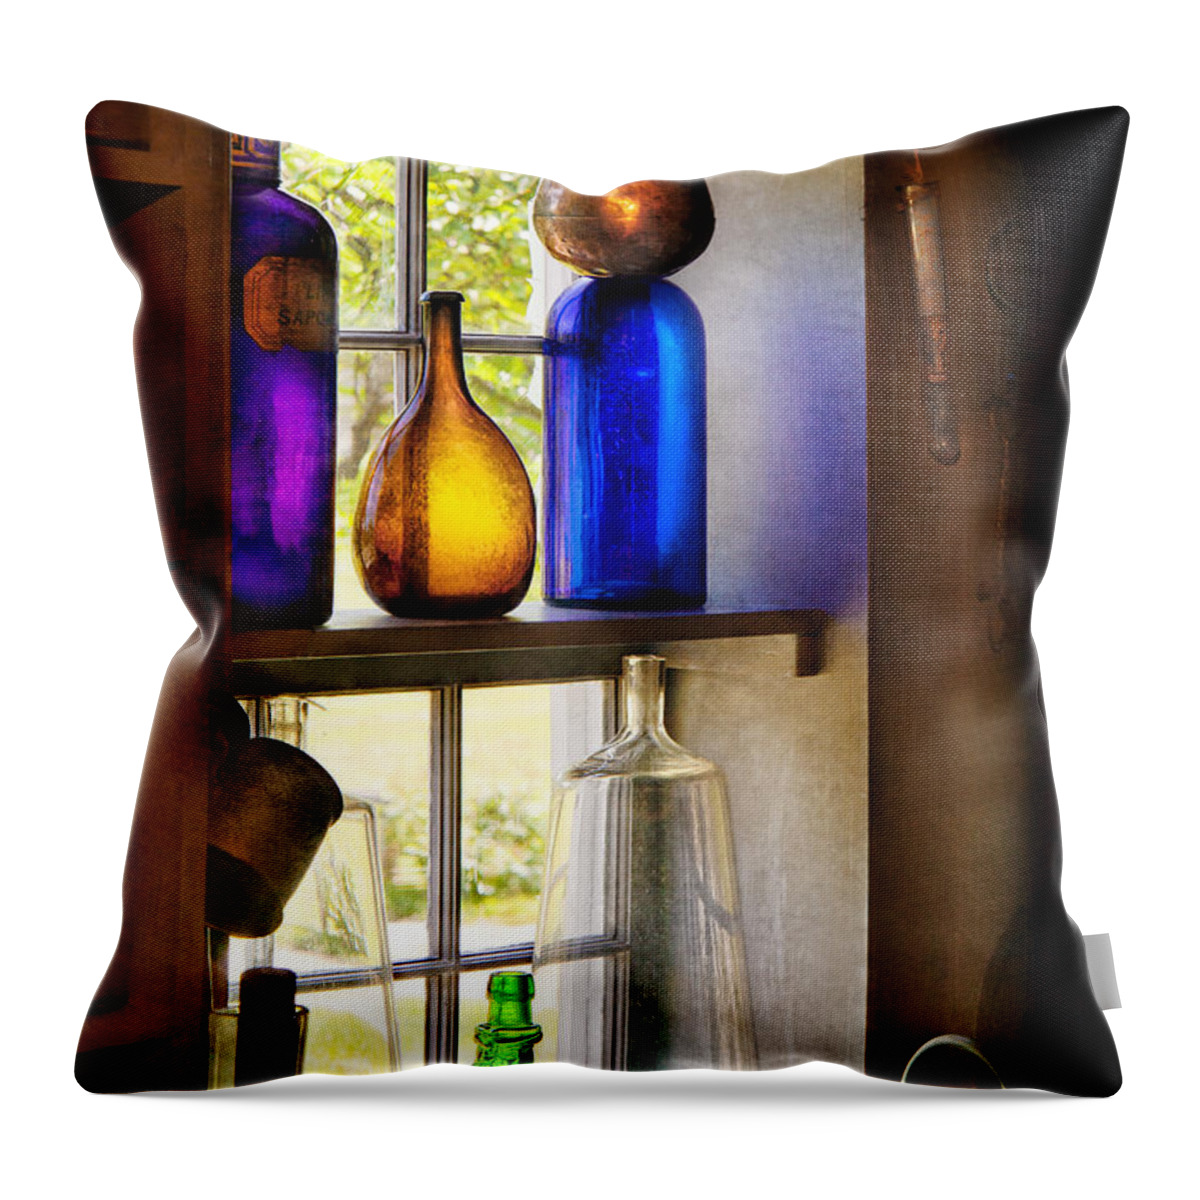 Hdr Throw Pillow featuring the photograph Pharmacy - Colorful glassware by Mike Savad